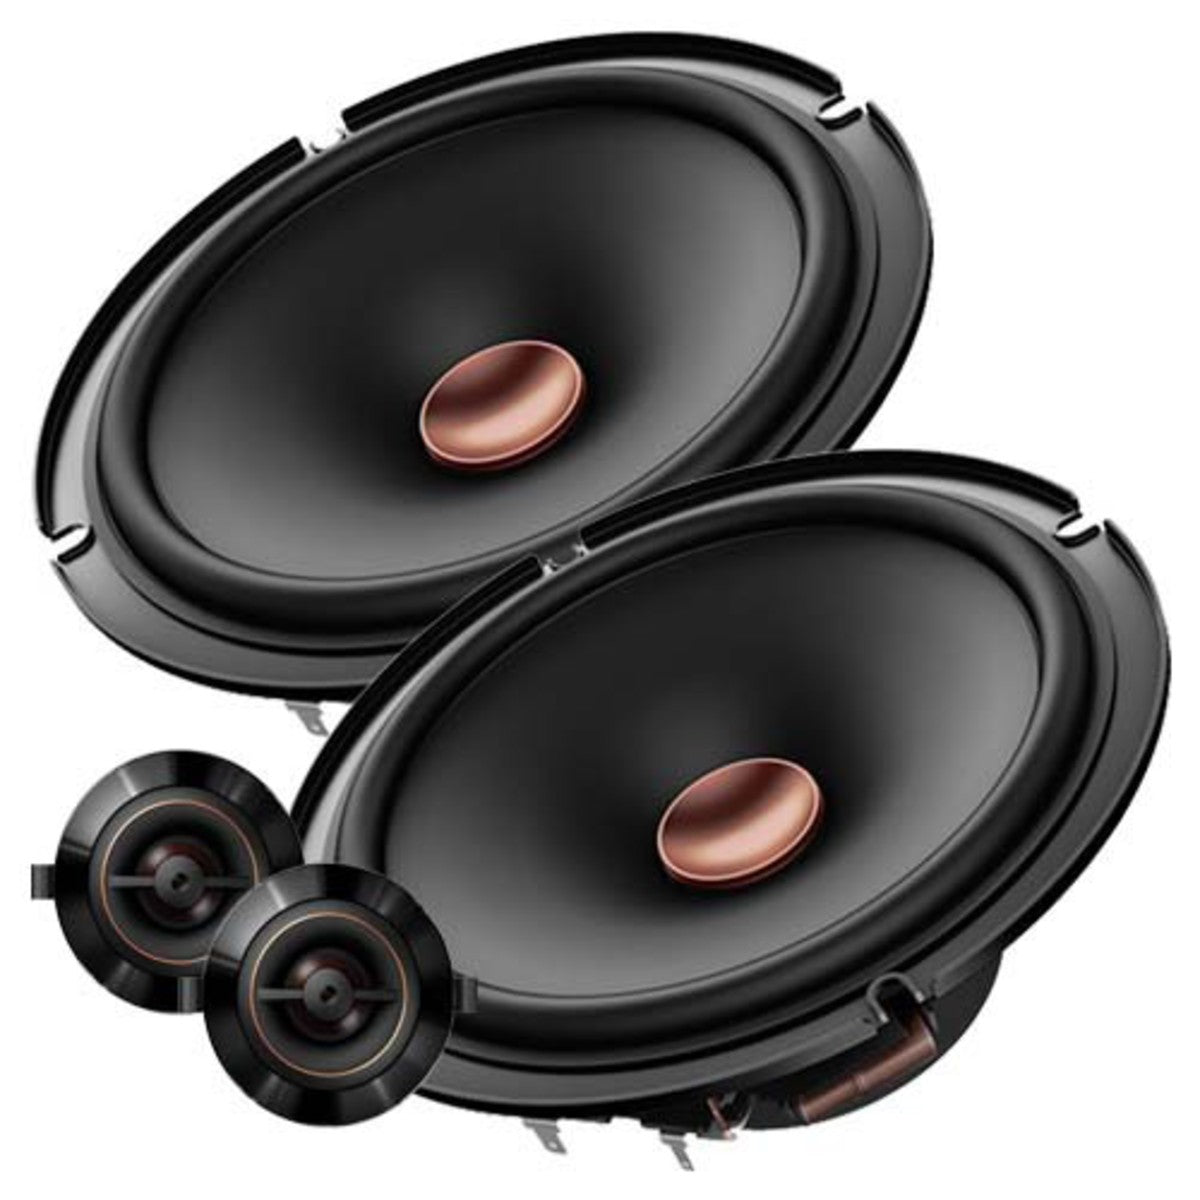 Pioneer TS-D65C D Series 6-1/2" component speaker system